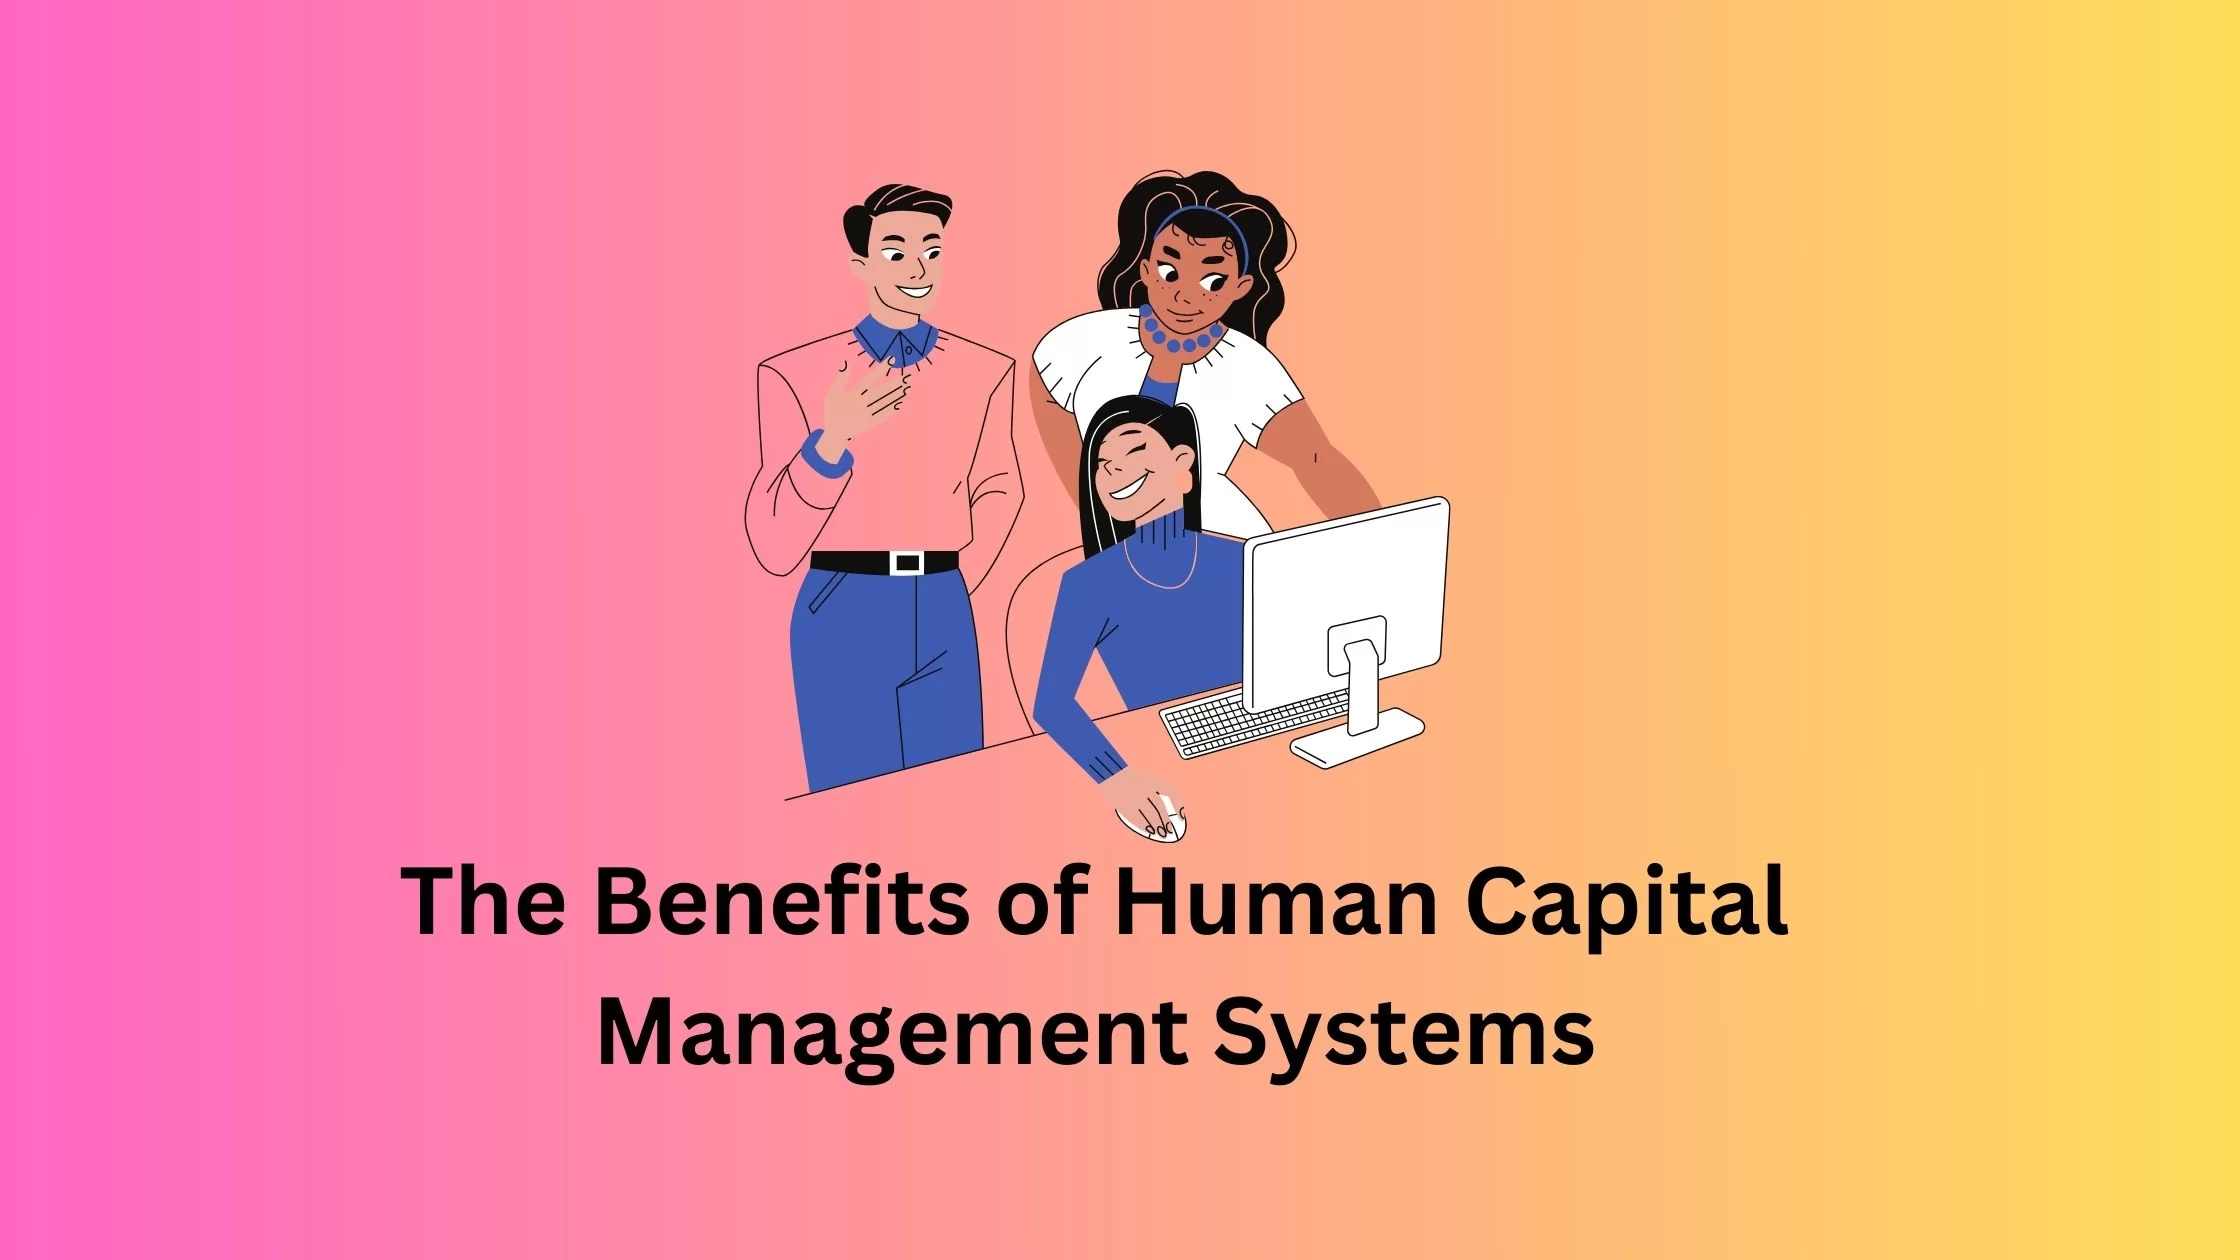 The benifits of human capital management systems written